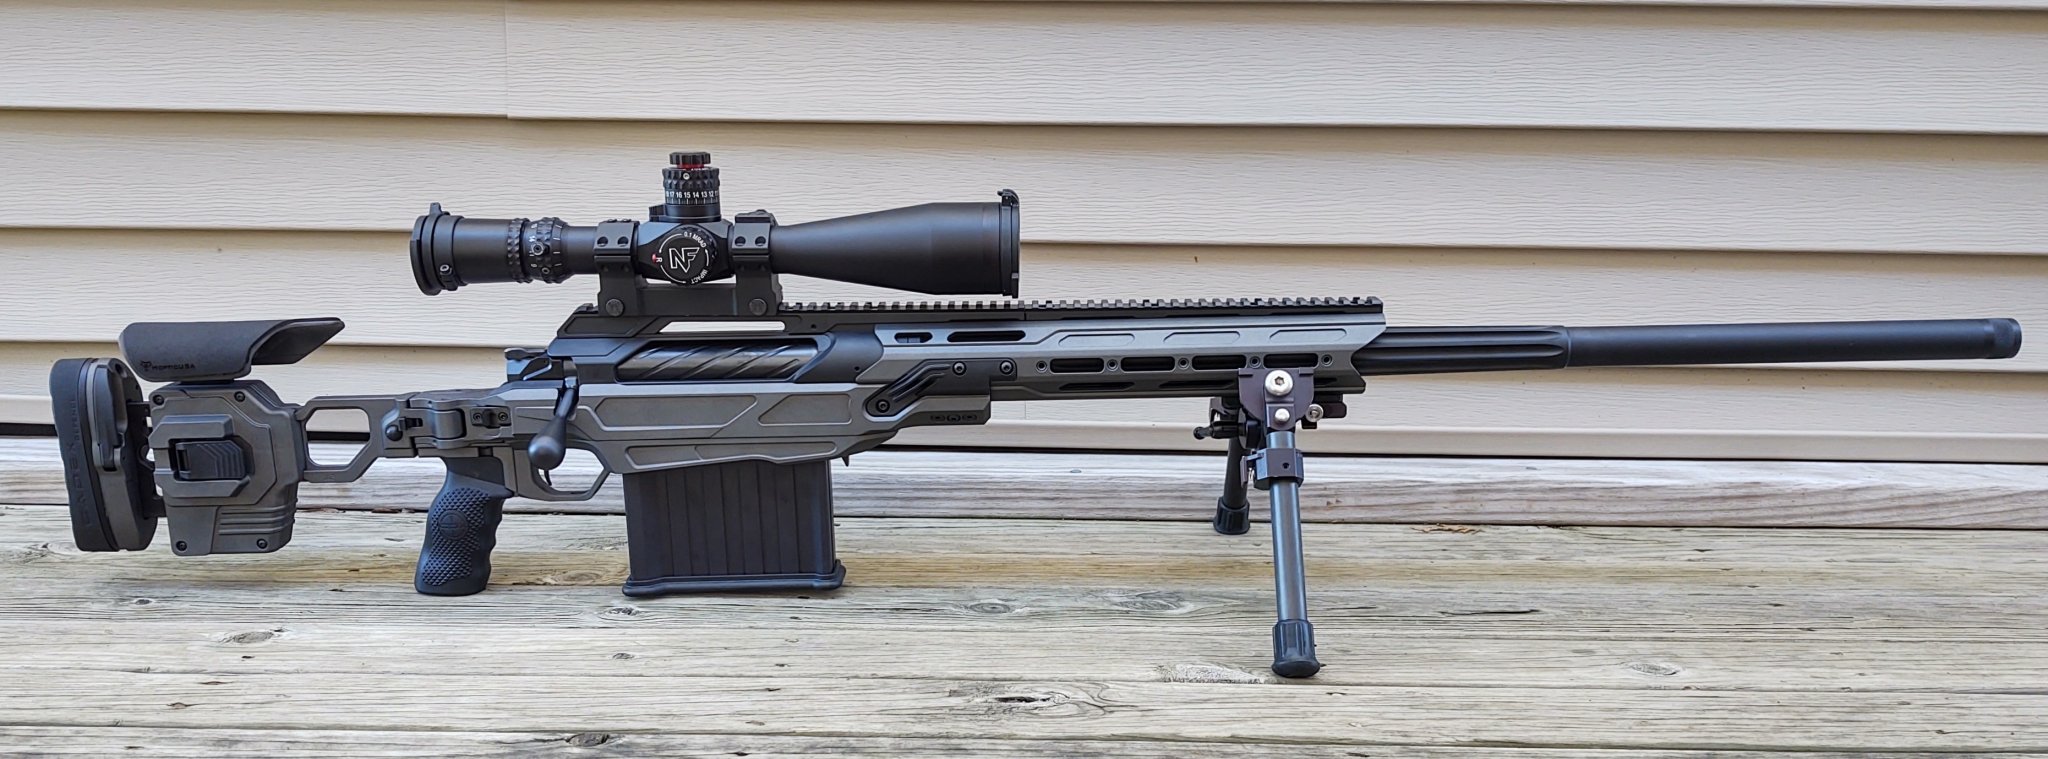 Cadex Defense rifles  Any owners out there ?